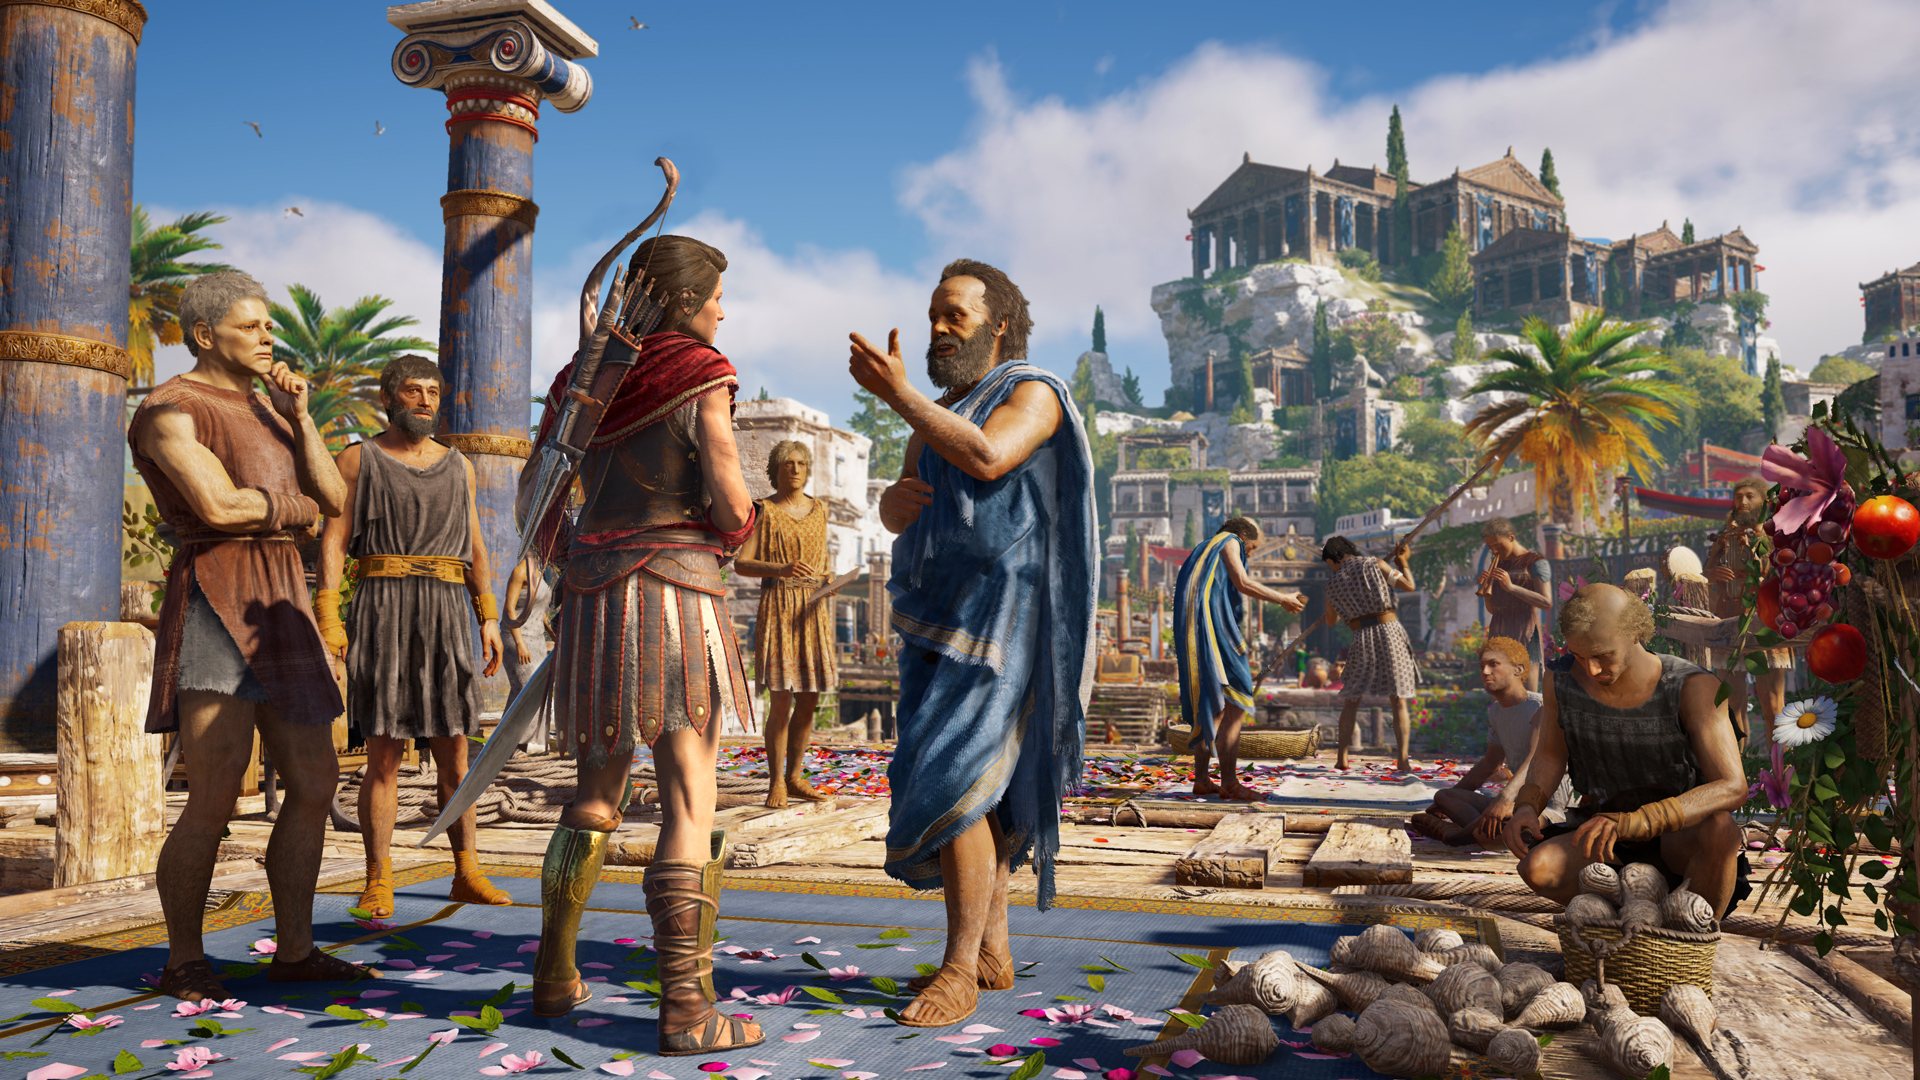 Assassin's Creed Odyssey Ultimate Edition US Ubisoft Connect CD Key